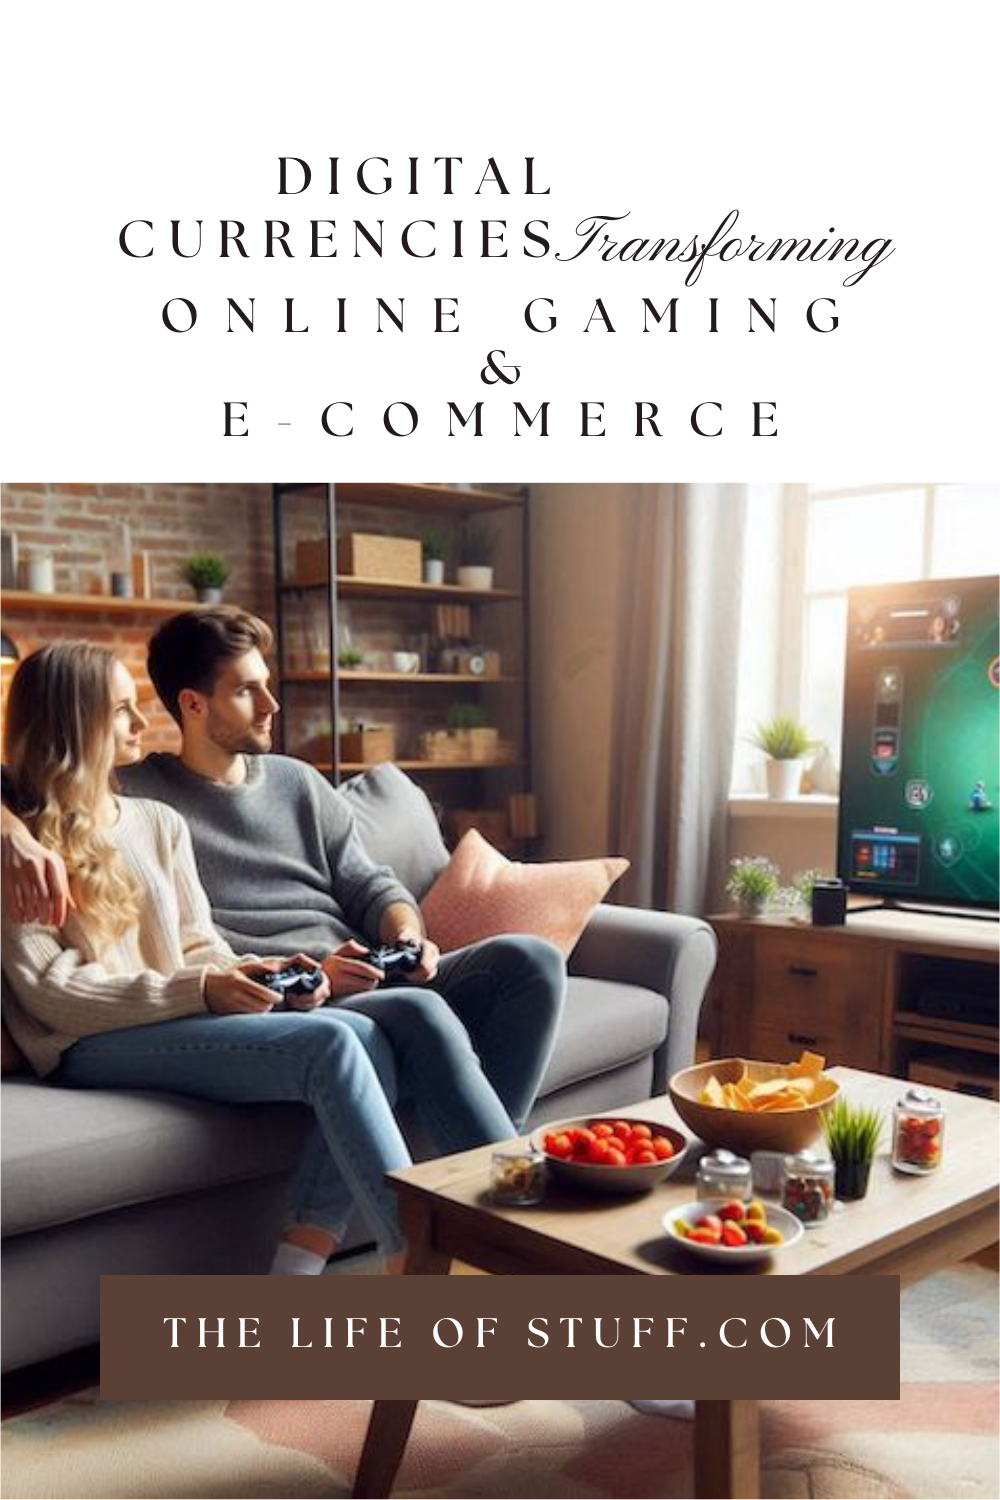 Digital Currencies Transforming Online Gaming & E-Commerce - The Life of Stuff